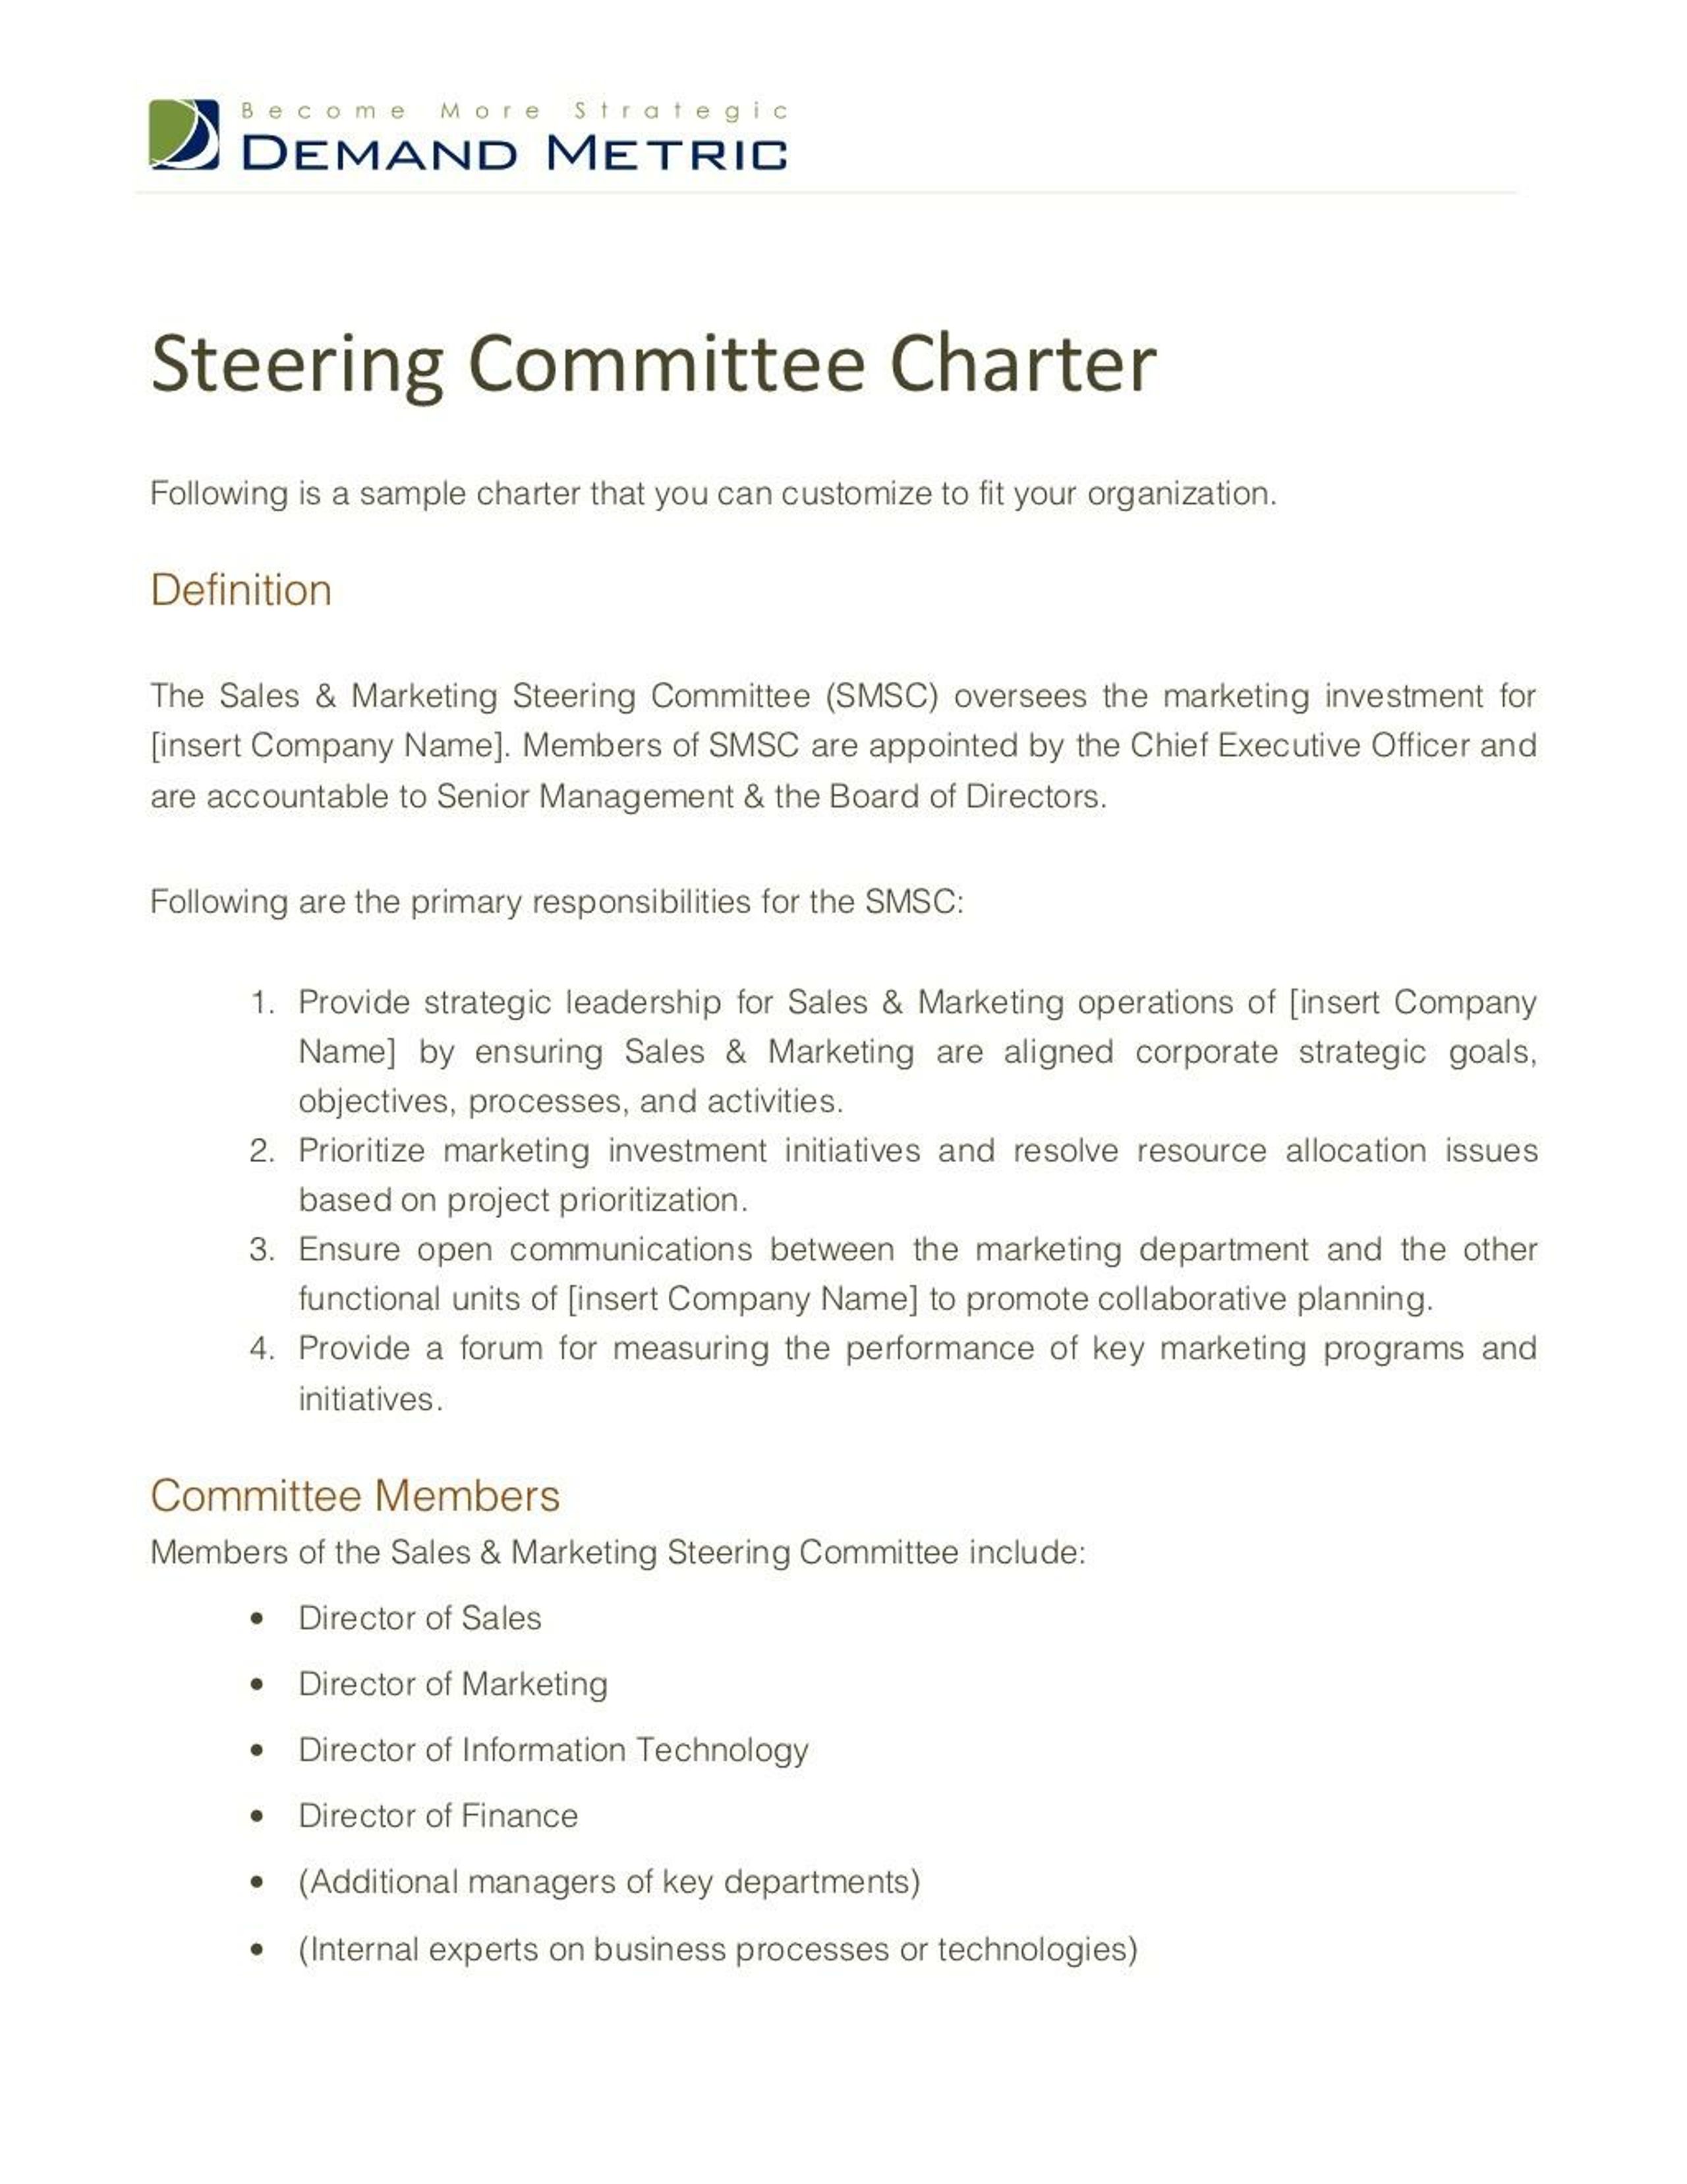 ppt-steering-committee-charter-template-powerpoint-presentation-free